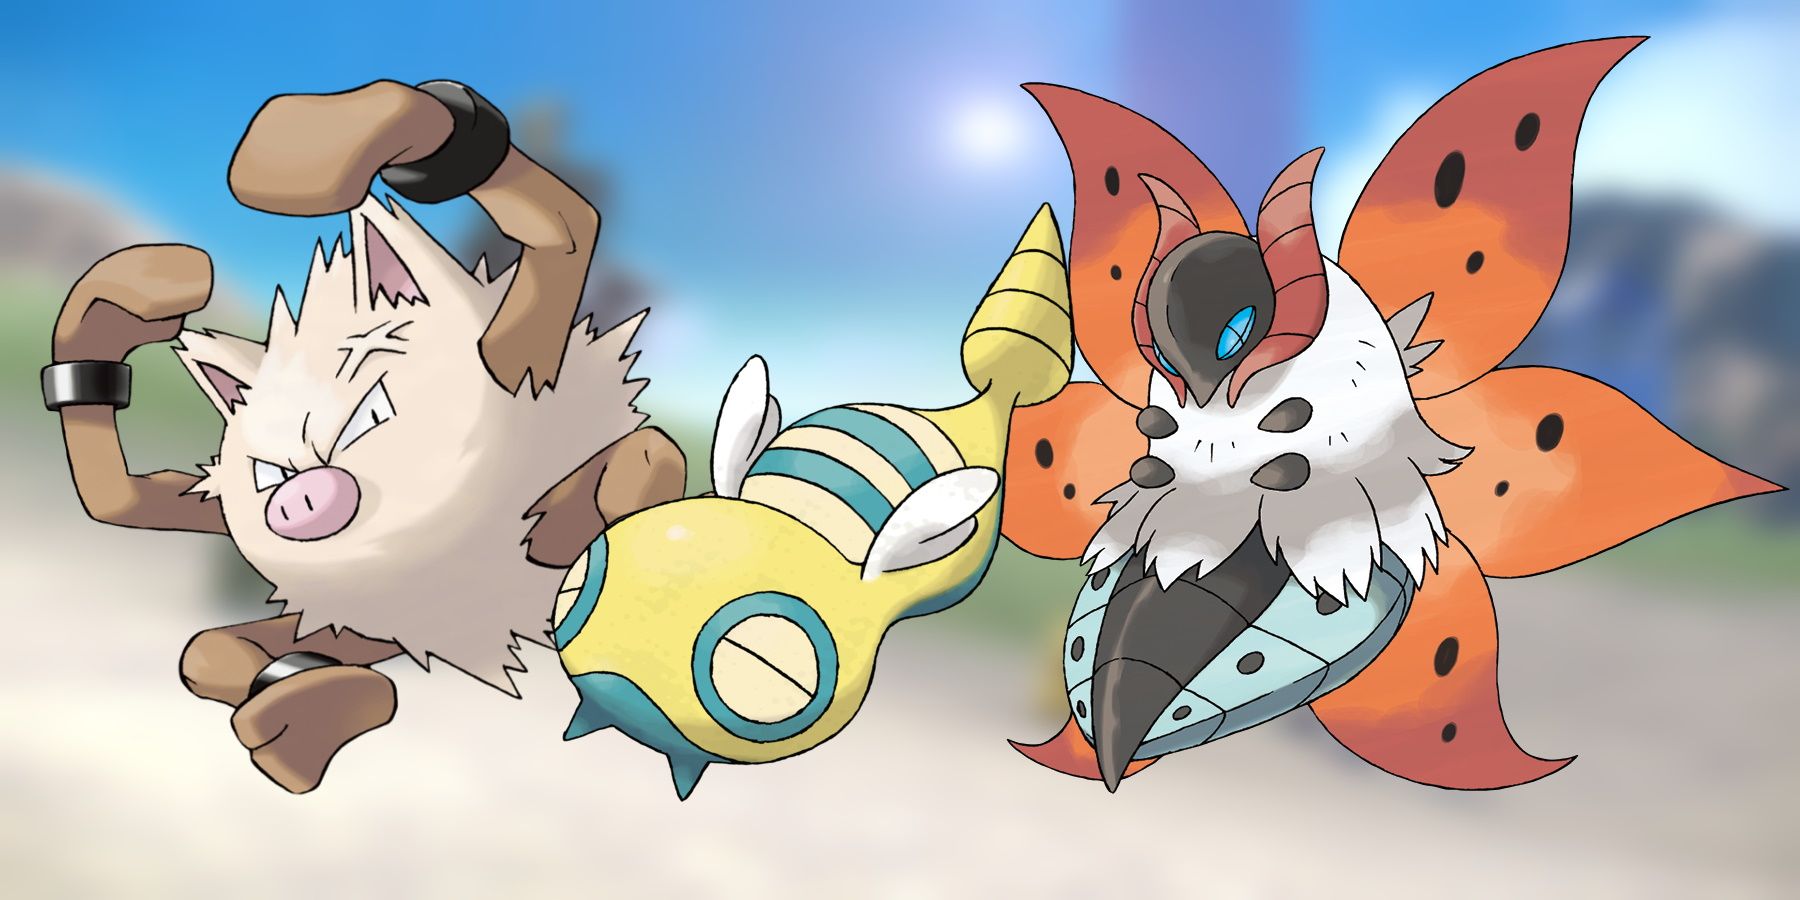 Pokémon Scarlet and Violet leaks spoil new evolutions, forms, and story -  Polygon